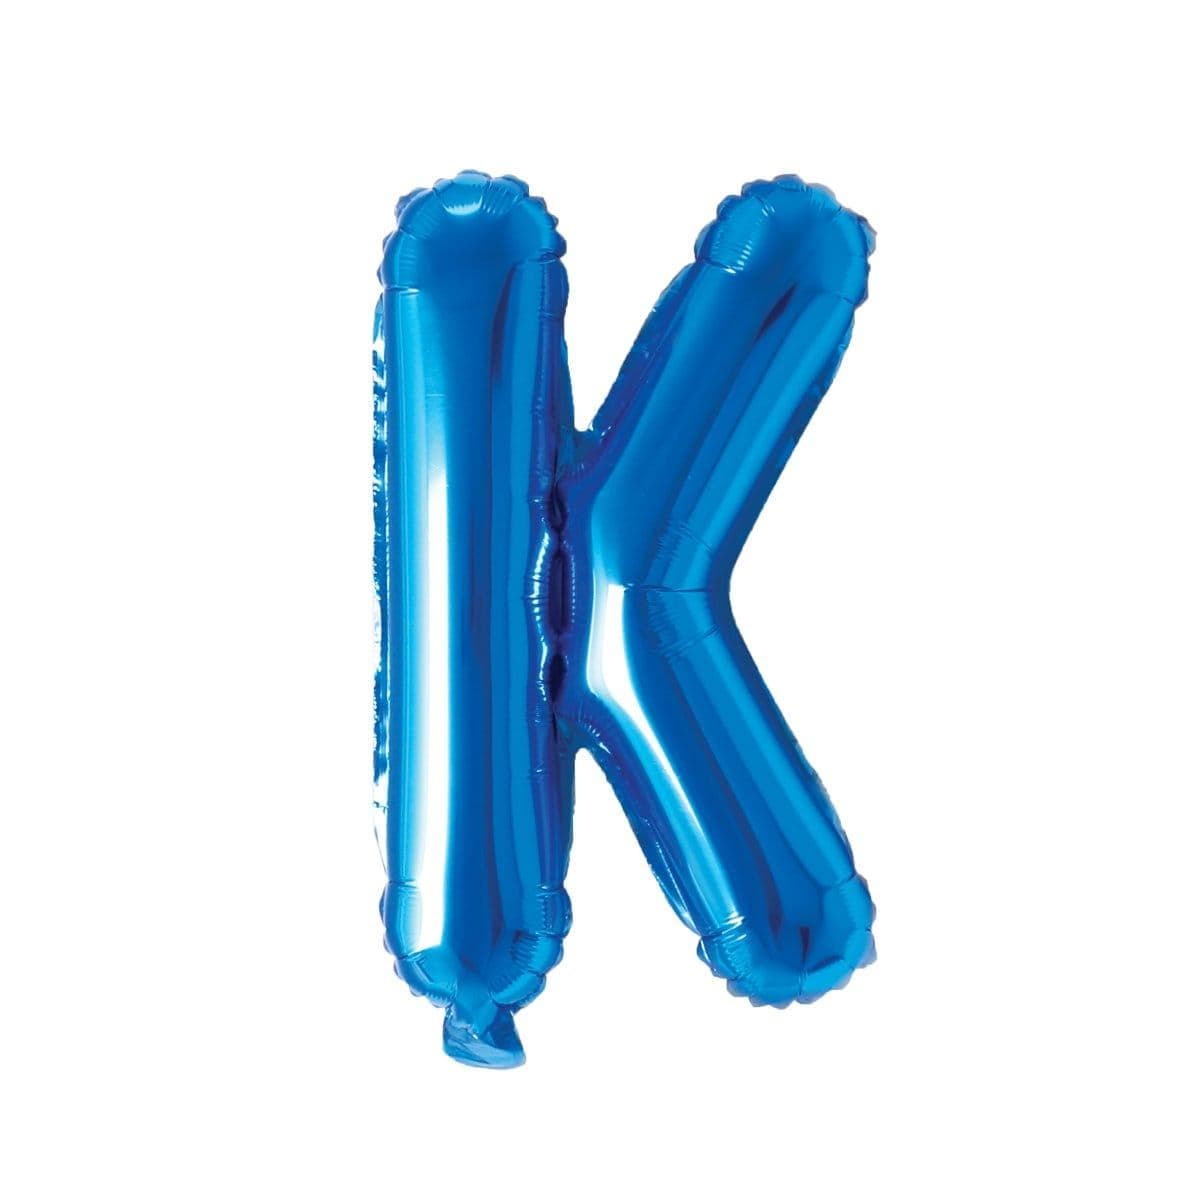 Buy Balloons Blue Letter K Foil Balloon, 16 Inches sold at Party Expert